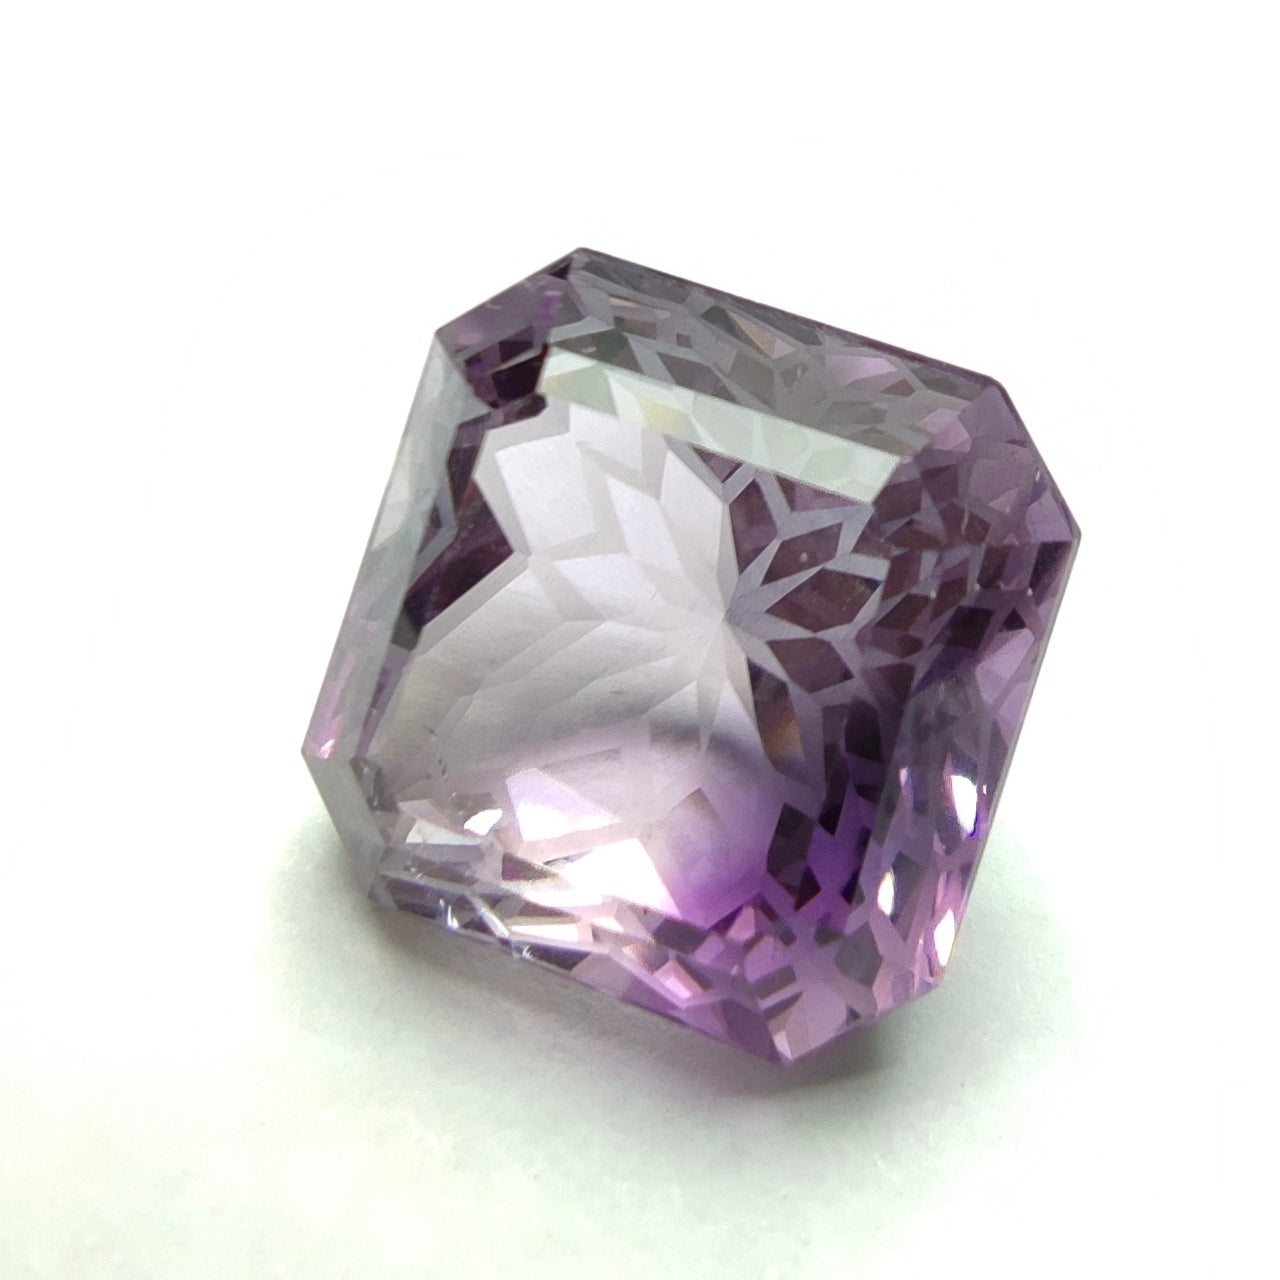 ARSAA GEMS AND MINERALSNatural beautiful 17.5 carats purple color faceted amethyst gem - Premium  from ARSAA GEMS AND MINERALS - Just $35! Shop now at ARSAA GEMS AND MINERALS